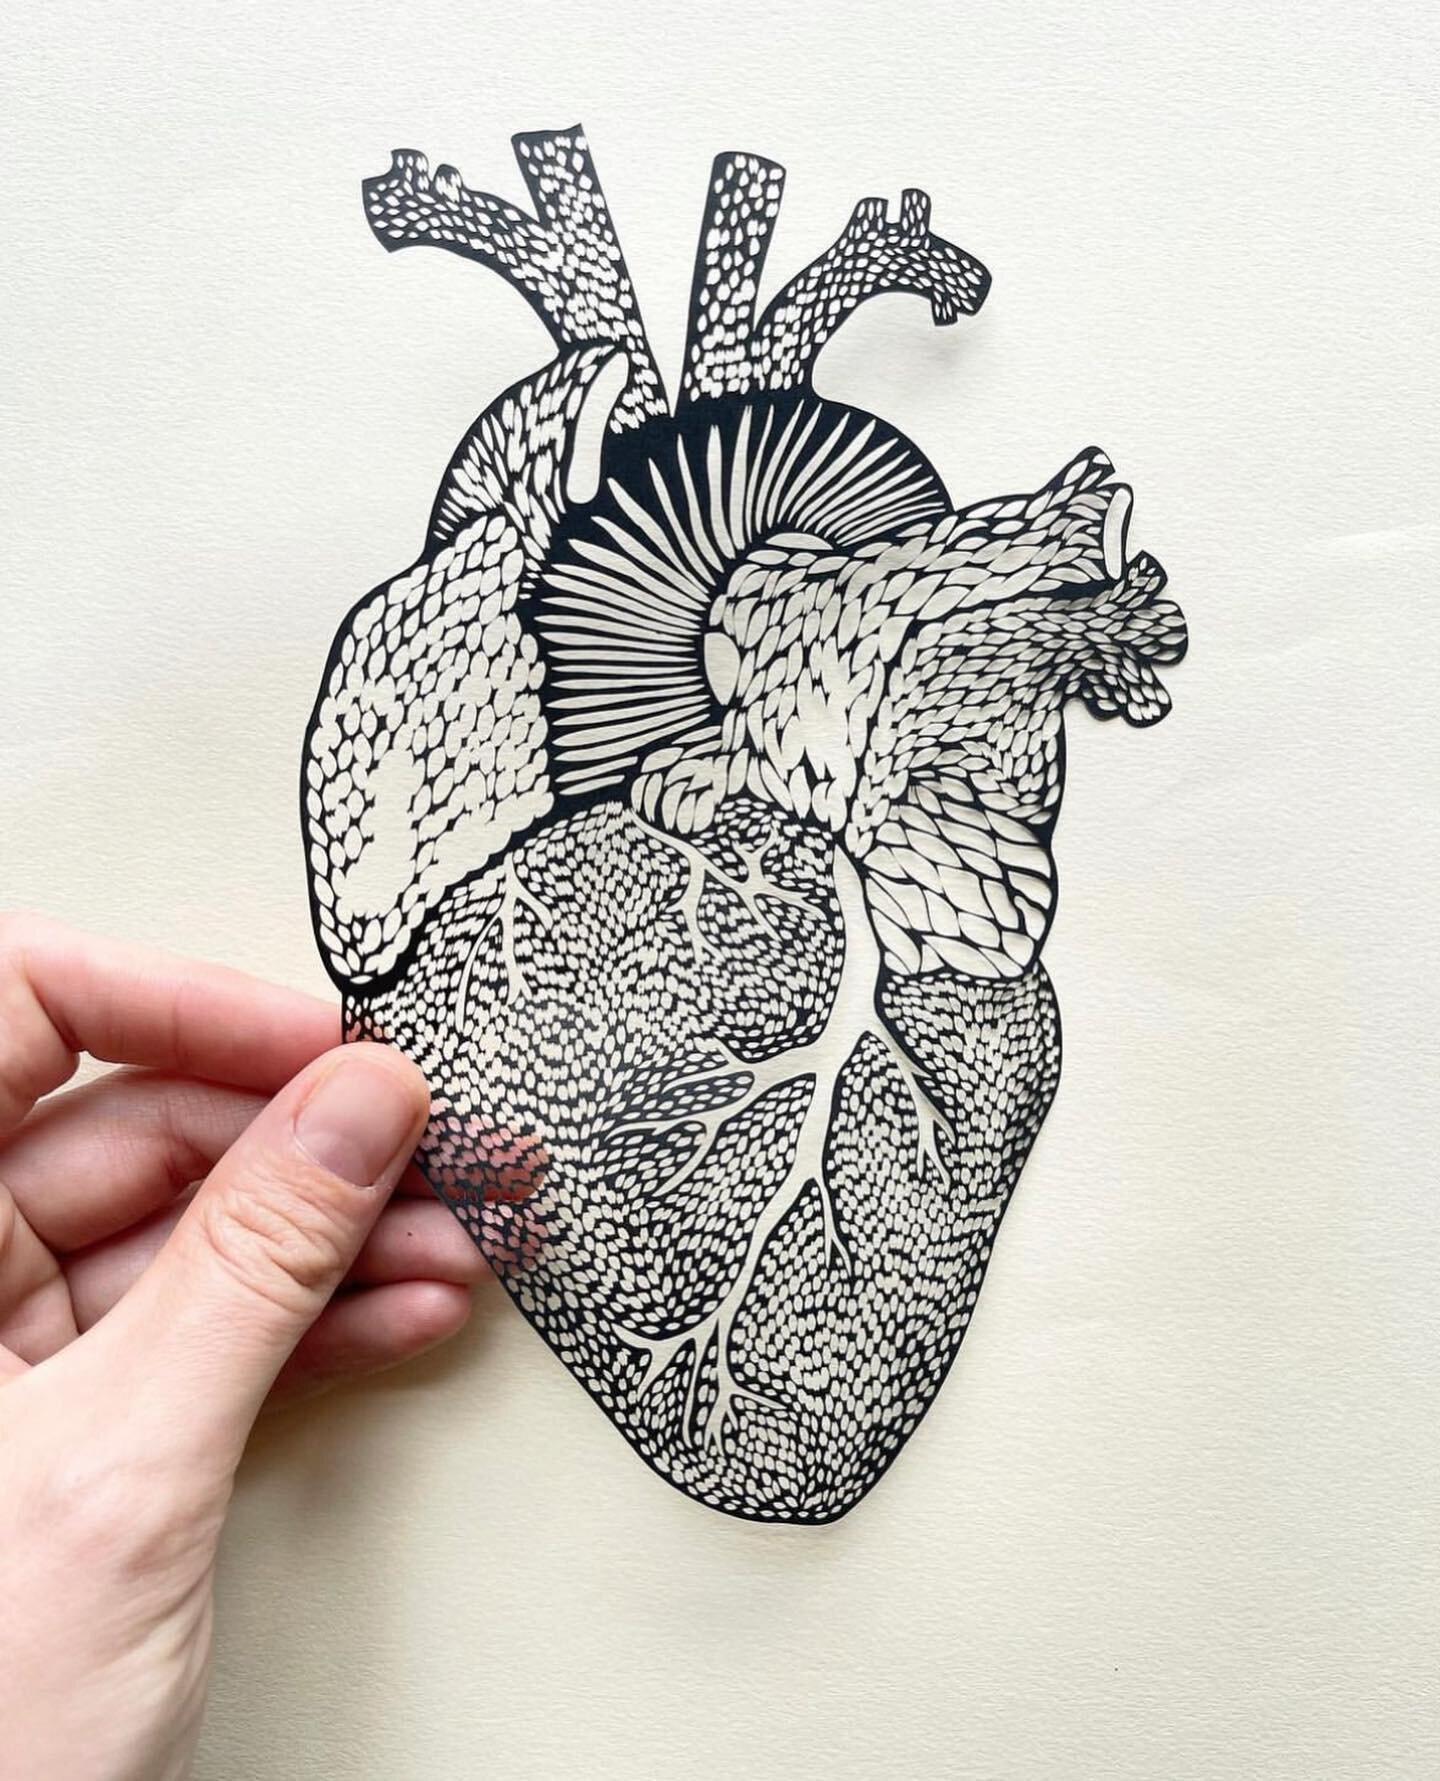 Yoga, like other forms of exercise, can improve your cholesterol and blood sugar levels by improving metabolism, and can lower blood pressure by improving artery relaxation. 

🎨 by @lightandpaperali #lightandpaperart